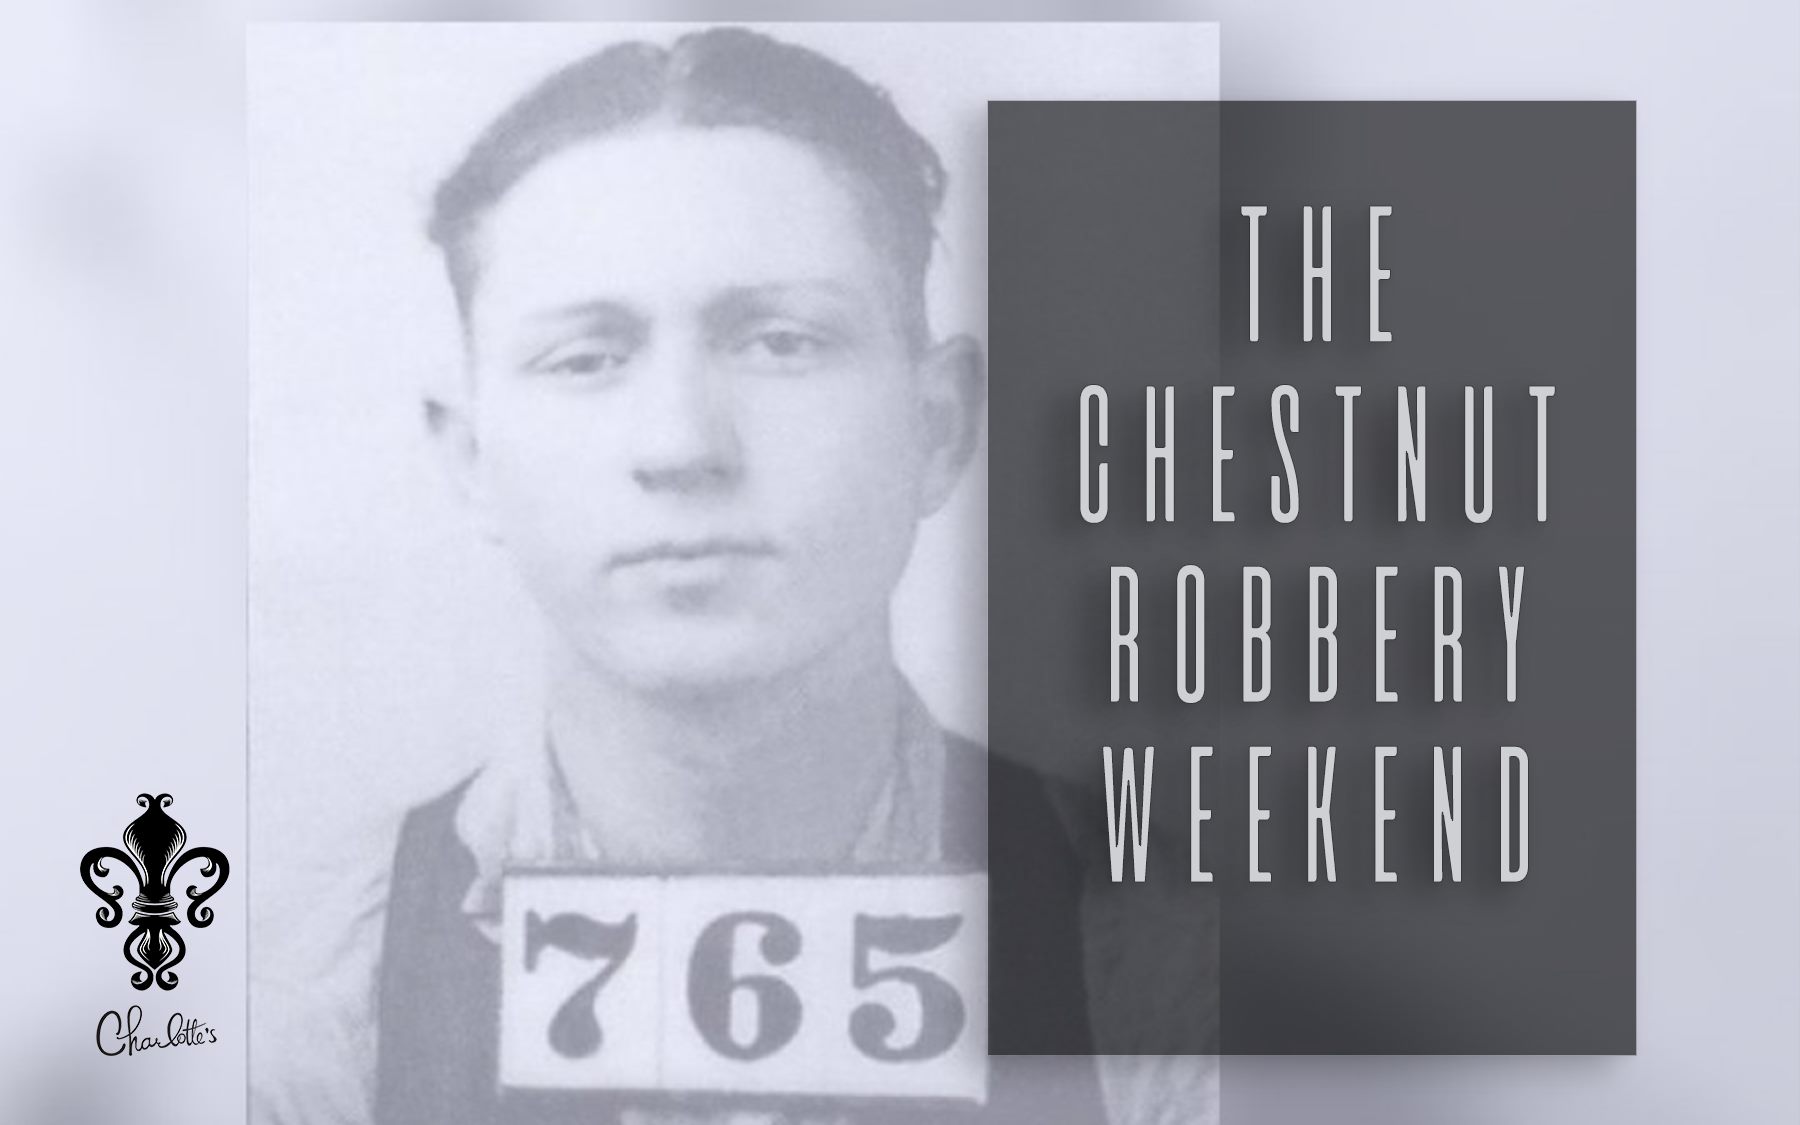 The Chestnut Robbery Weekend